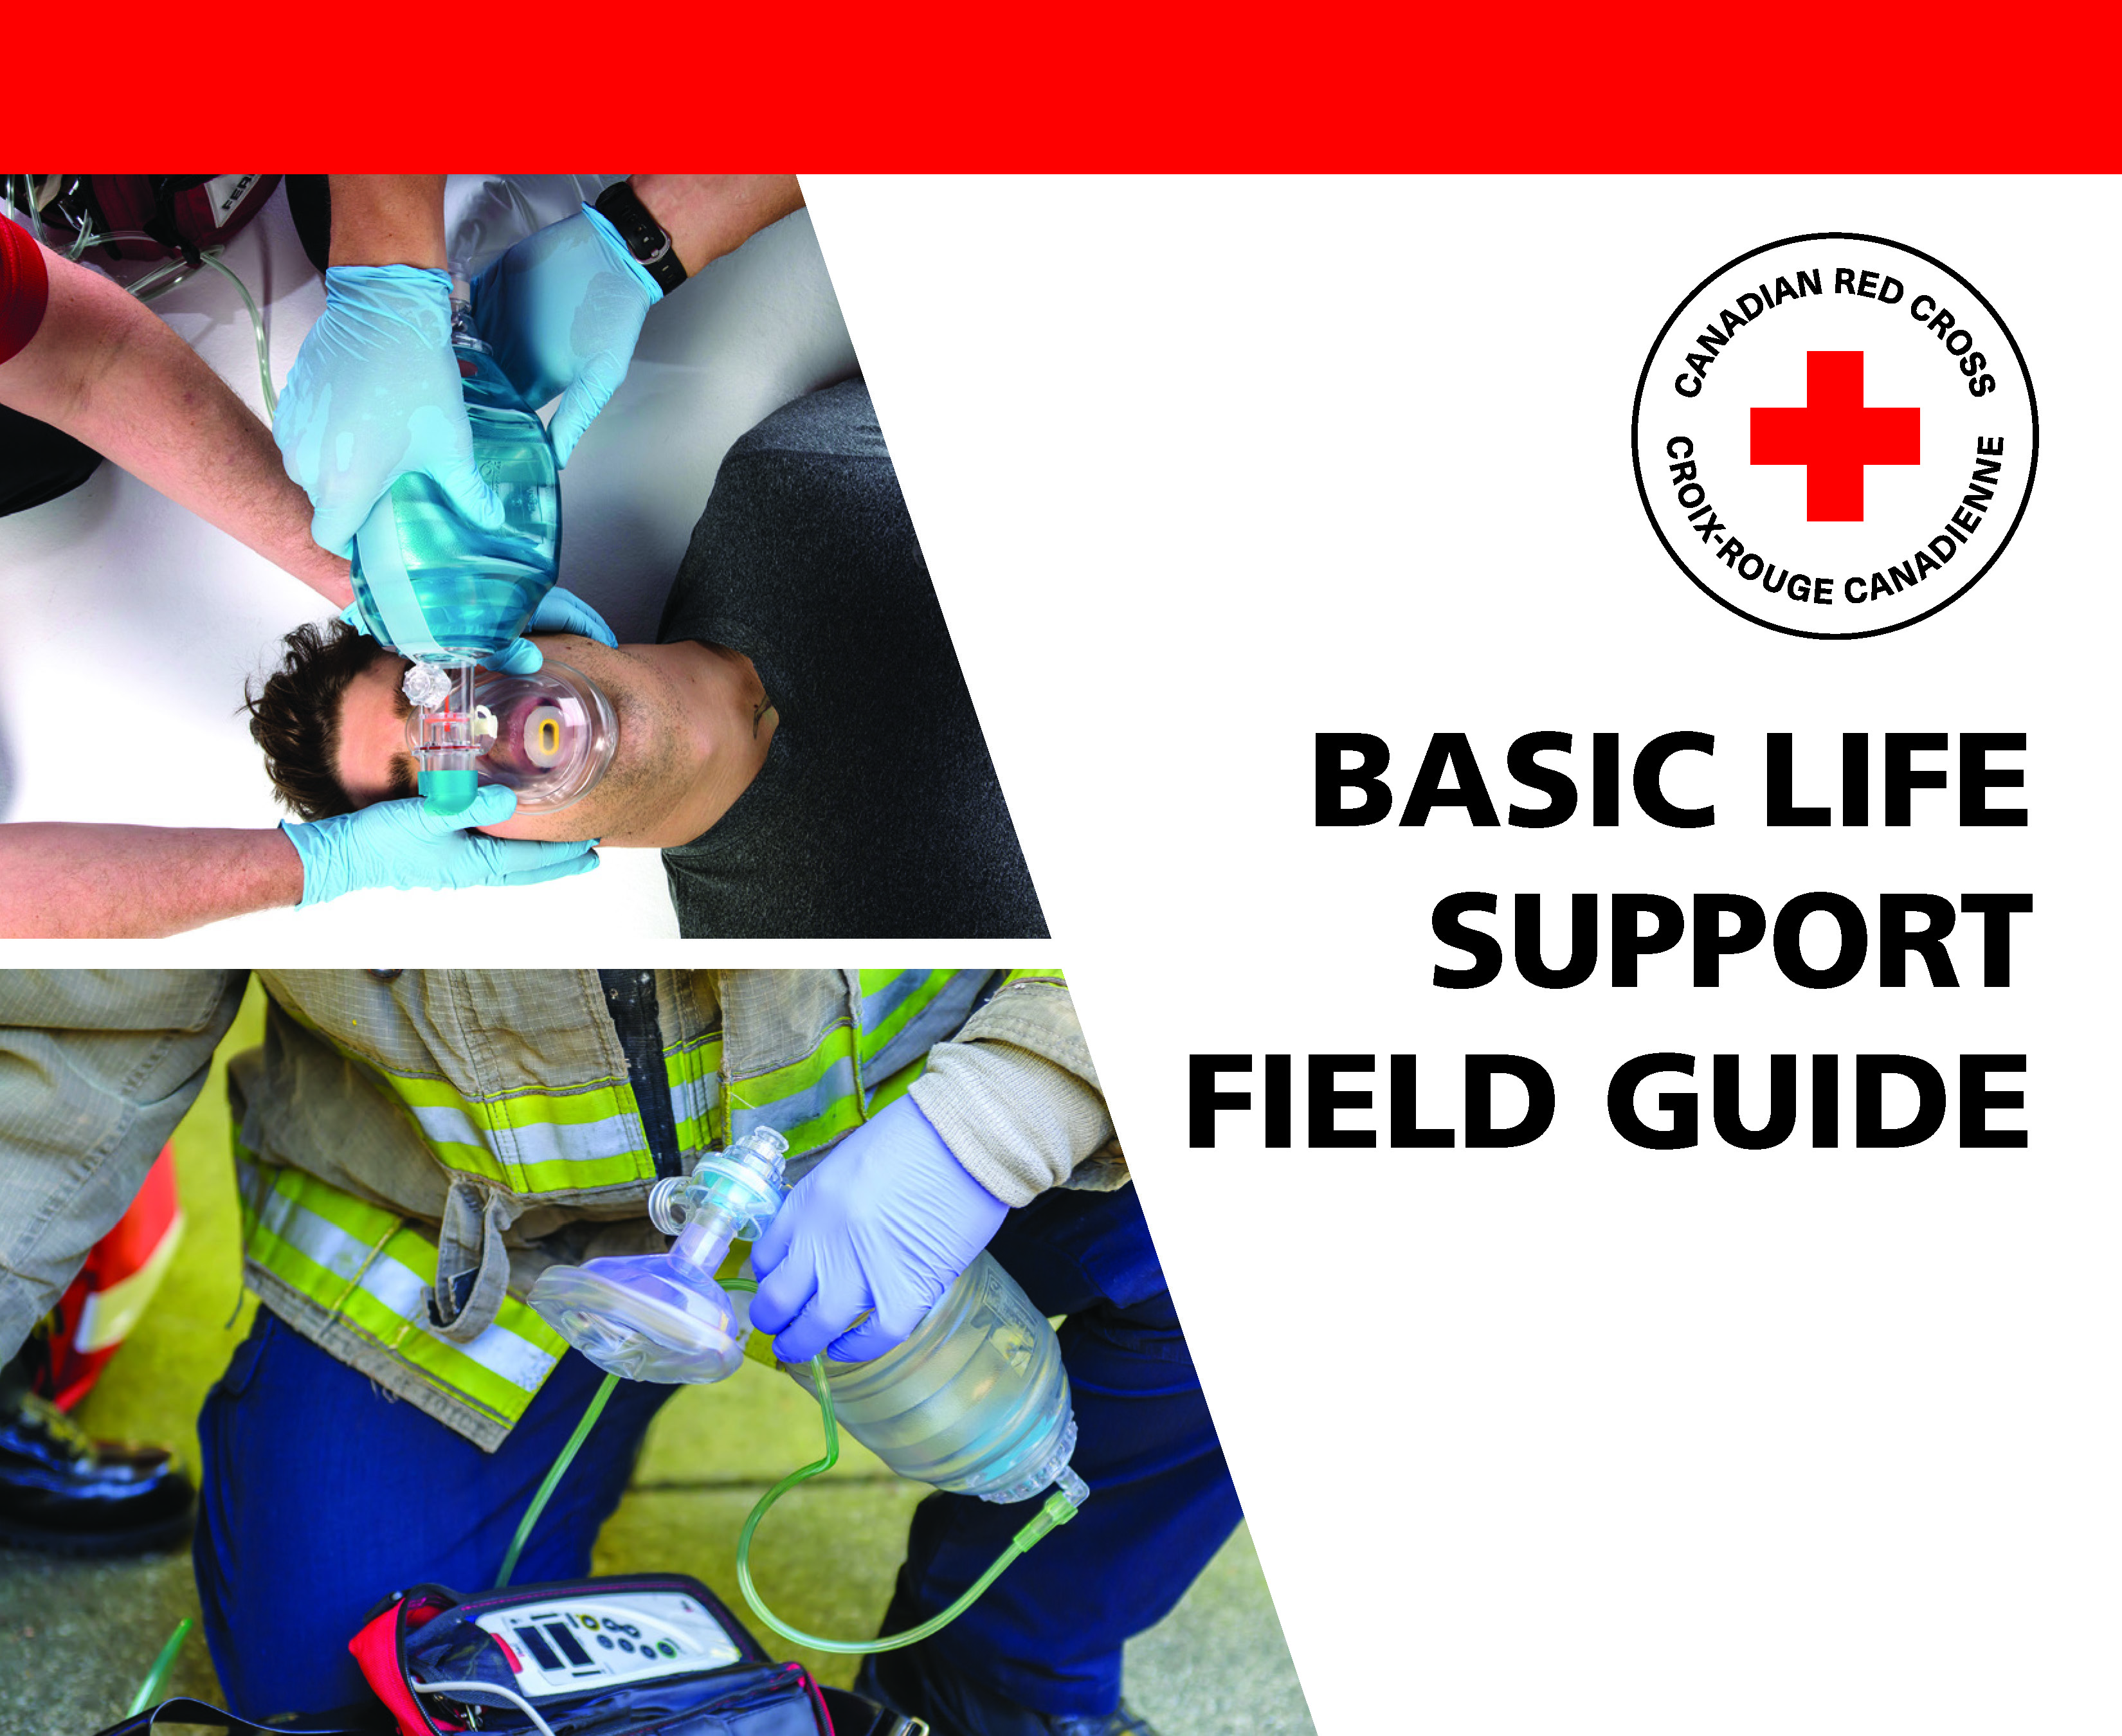 First Aid Course Materials for Basic Life Support in Nanaimo